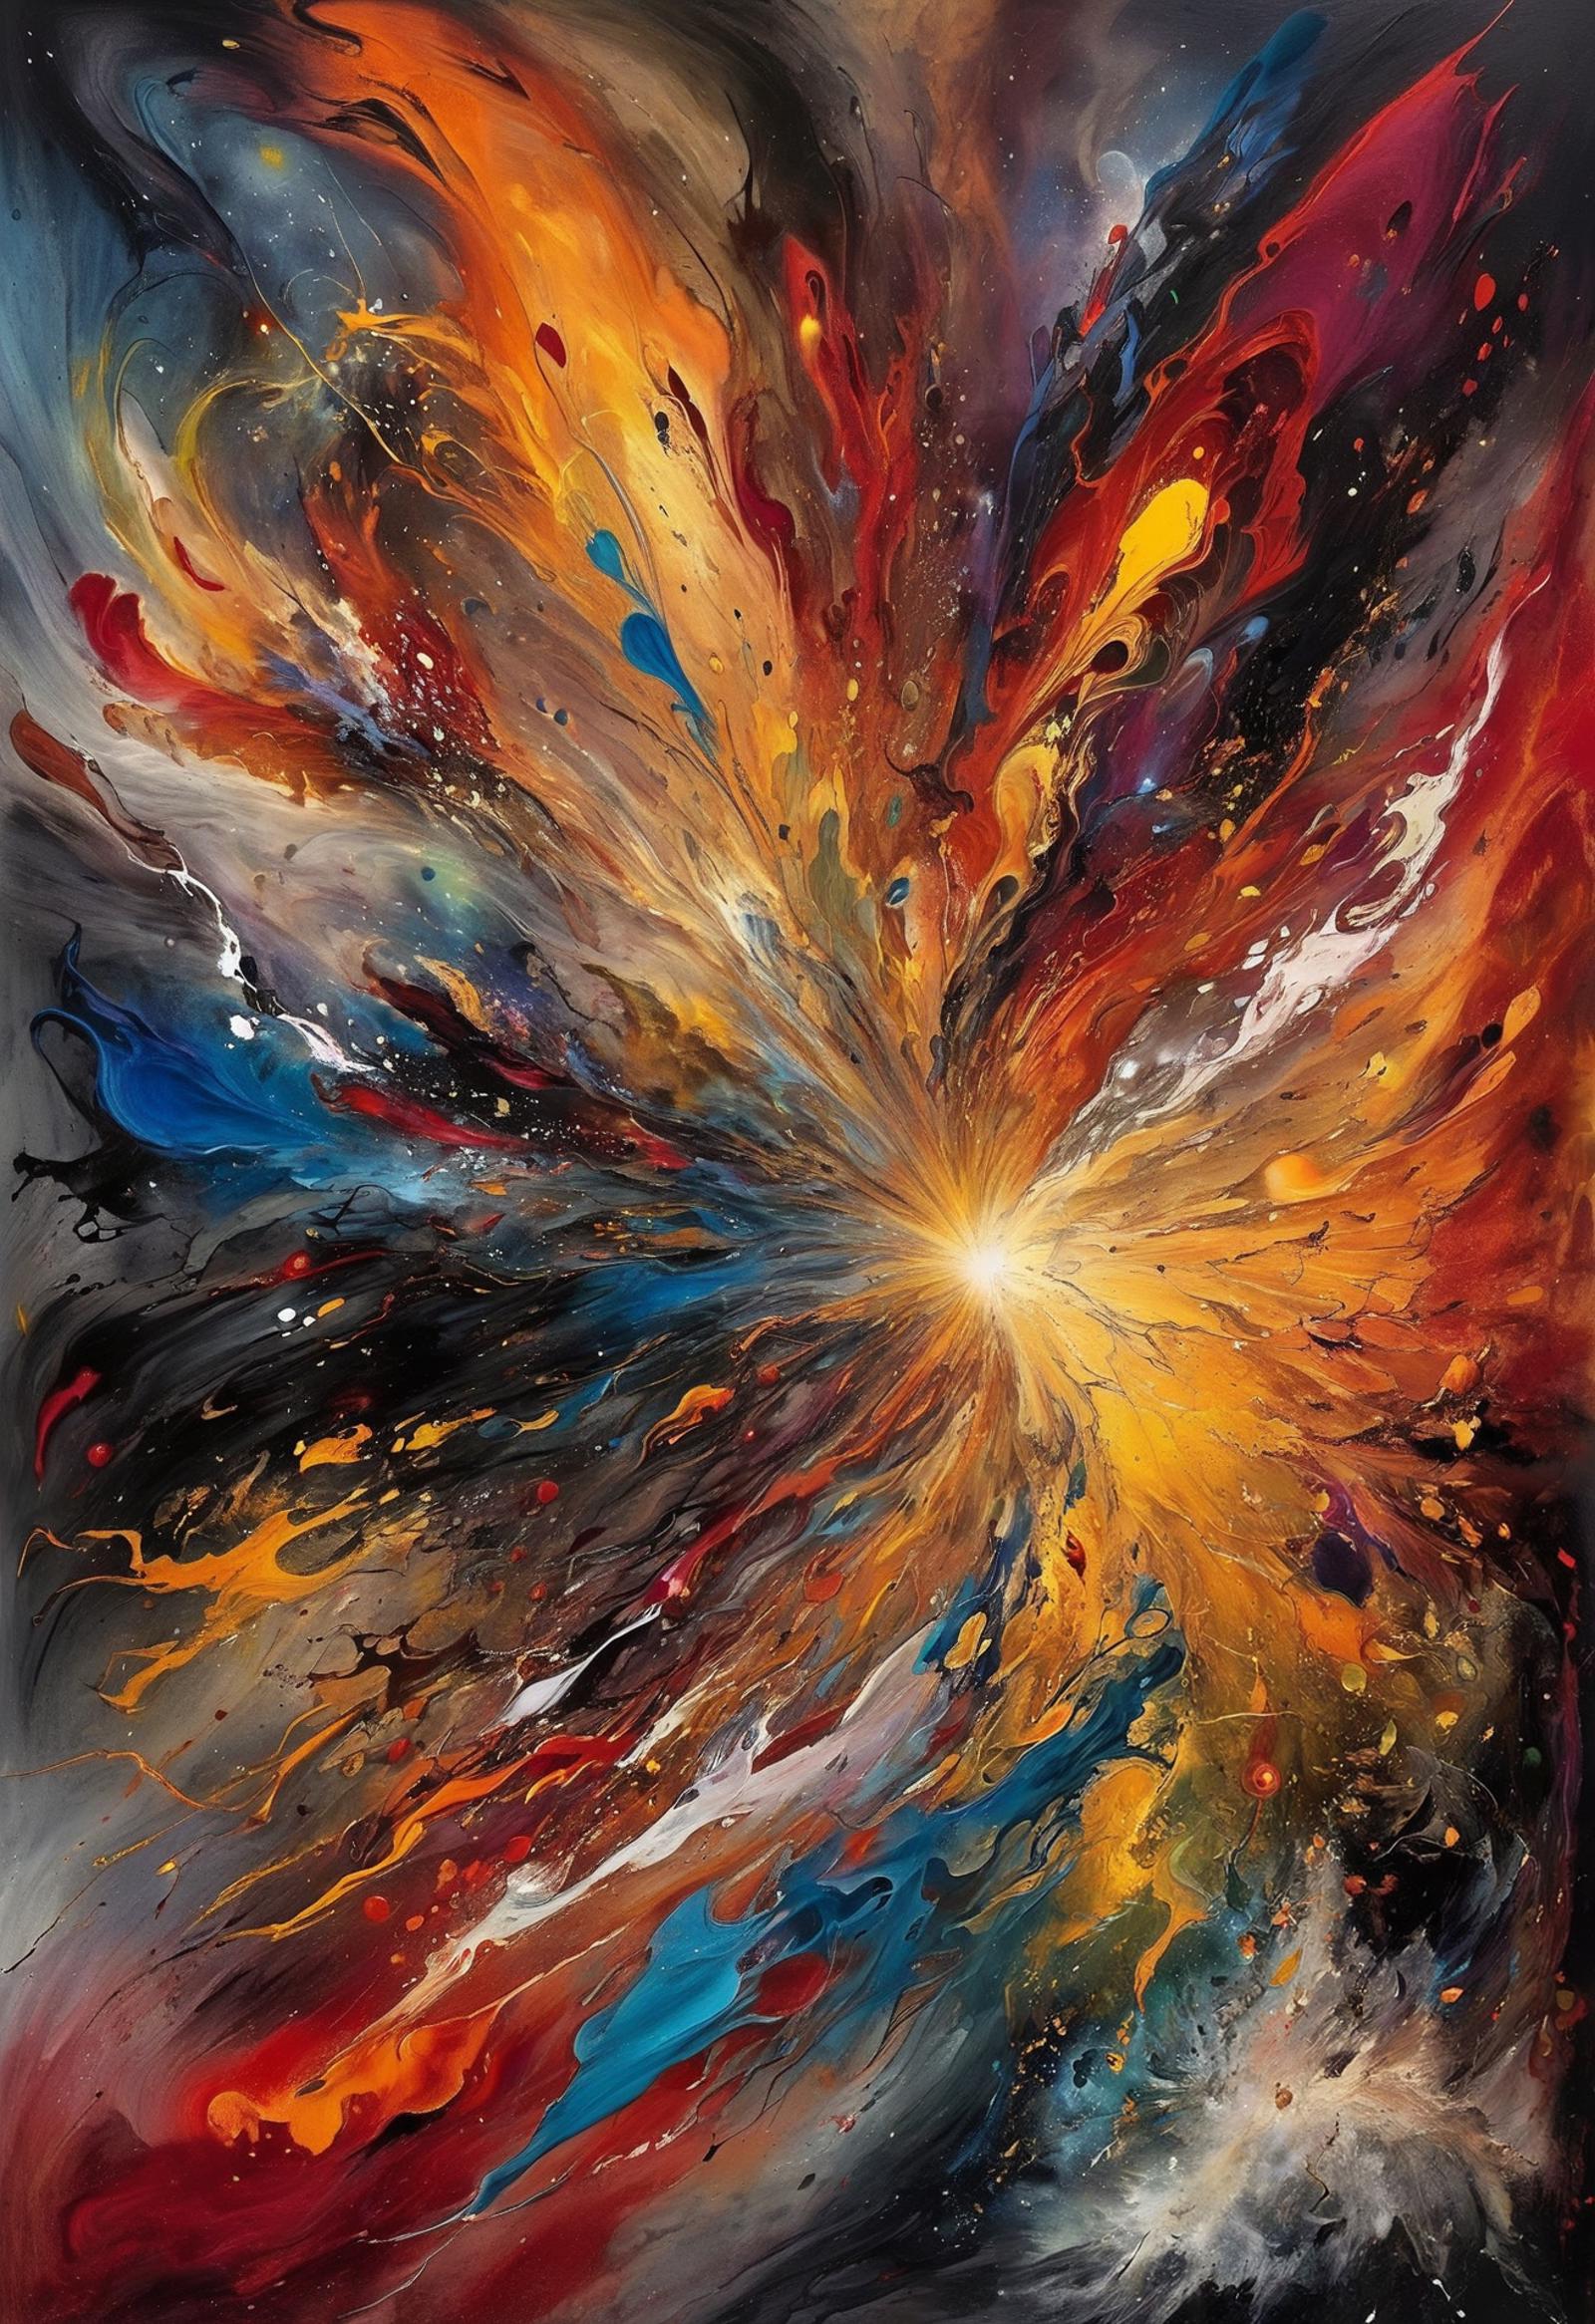 Vibrant Abstract Painting Featuring a Colorful Sunburst in the Middle